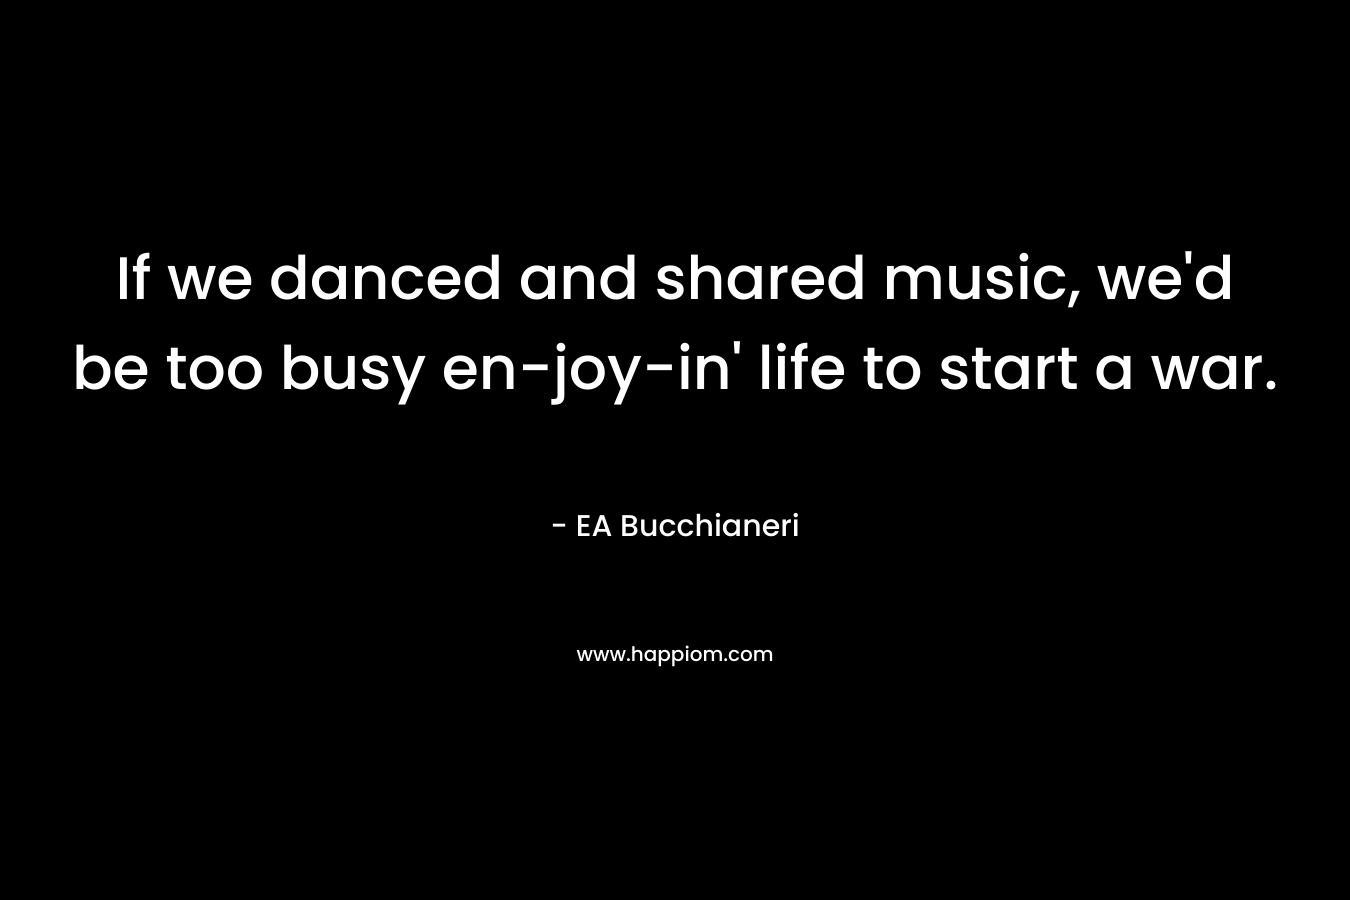 If we danced and shared music, we'd be too busy en-joy-in' life to start a war.